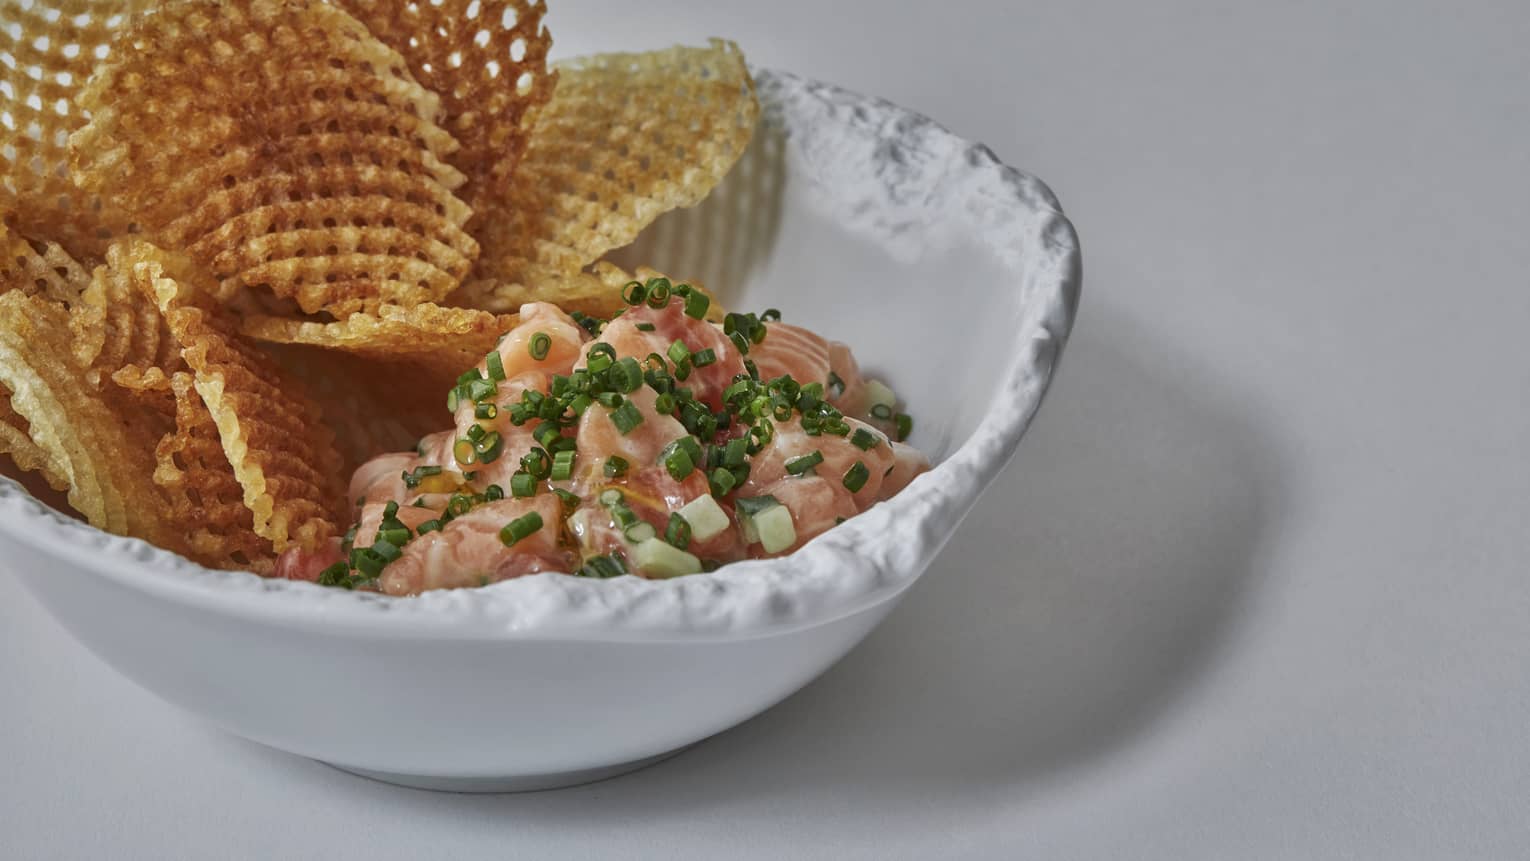 A waffle fry and salmon dish in a white porcelain bowl